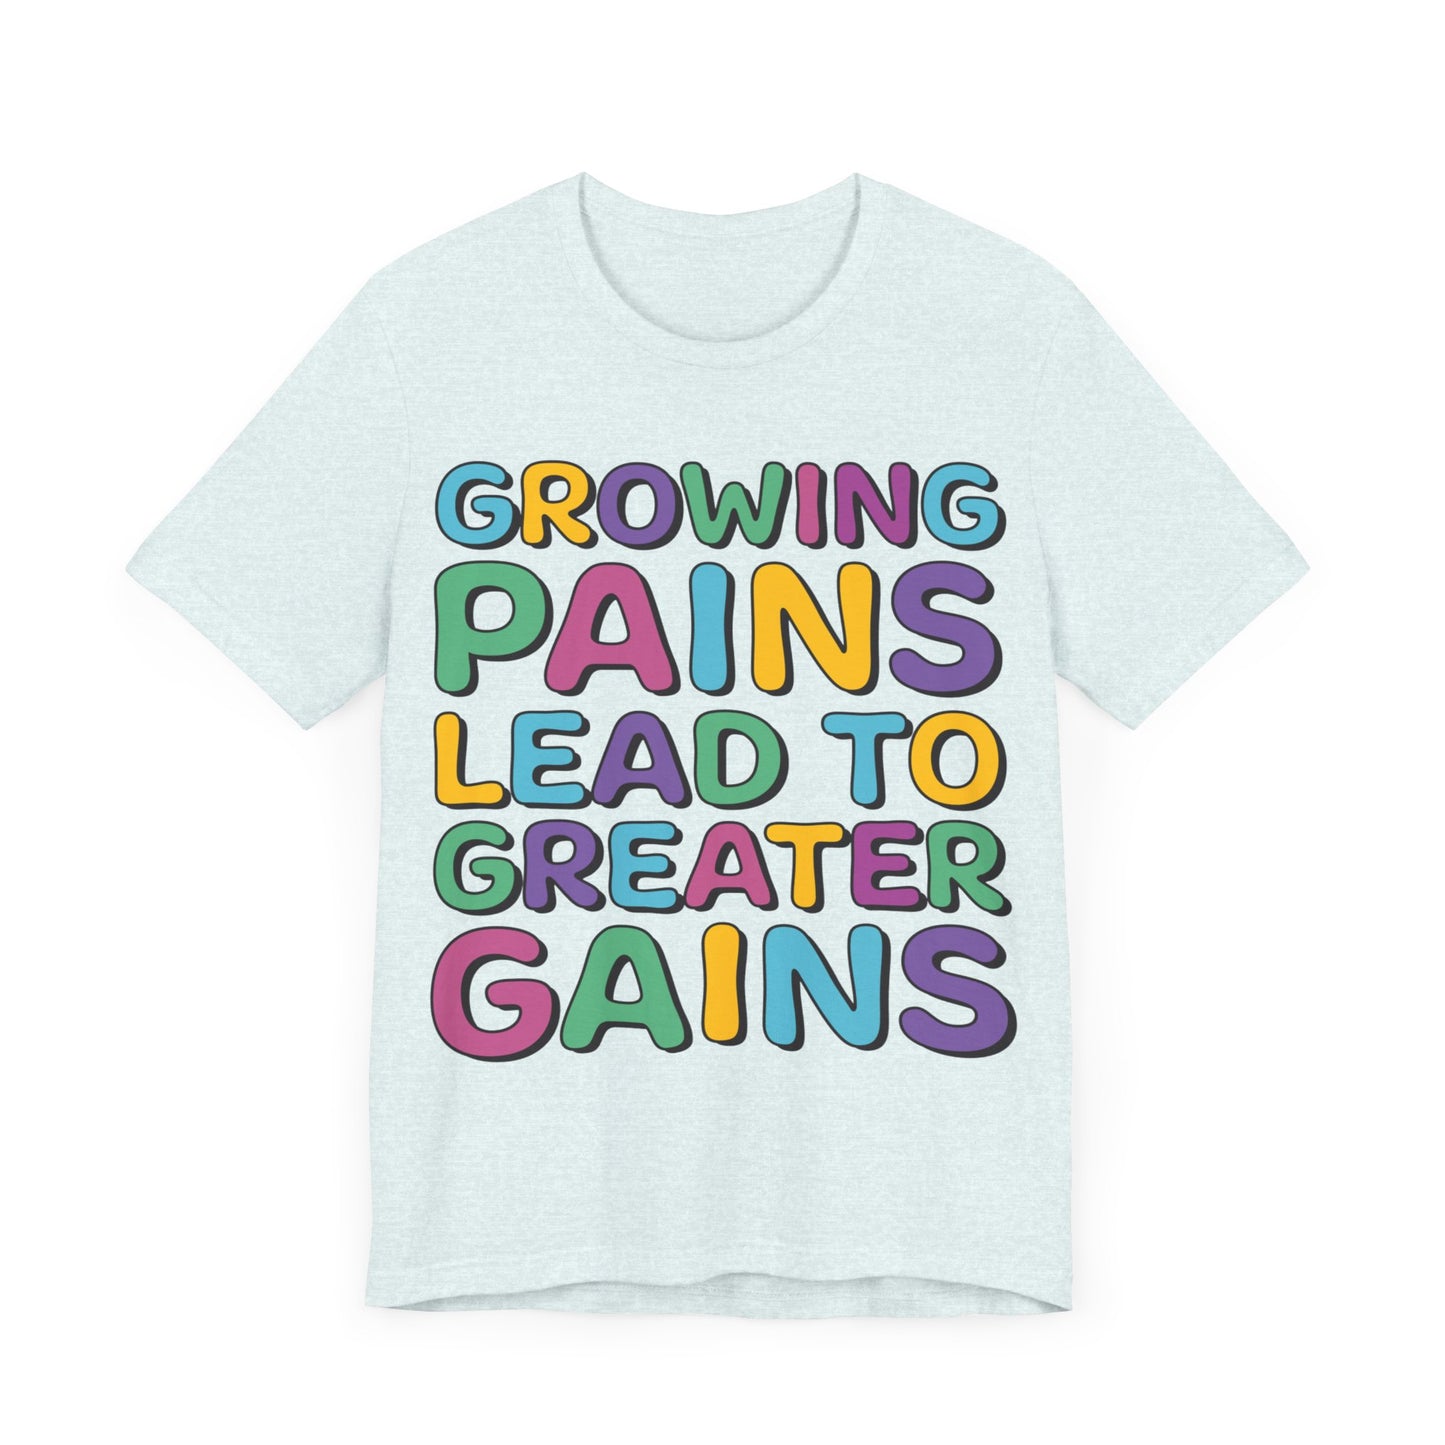 Growing Pains Lead To Greater Gains Shirt, Occupational Therapy Shirt